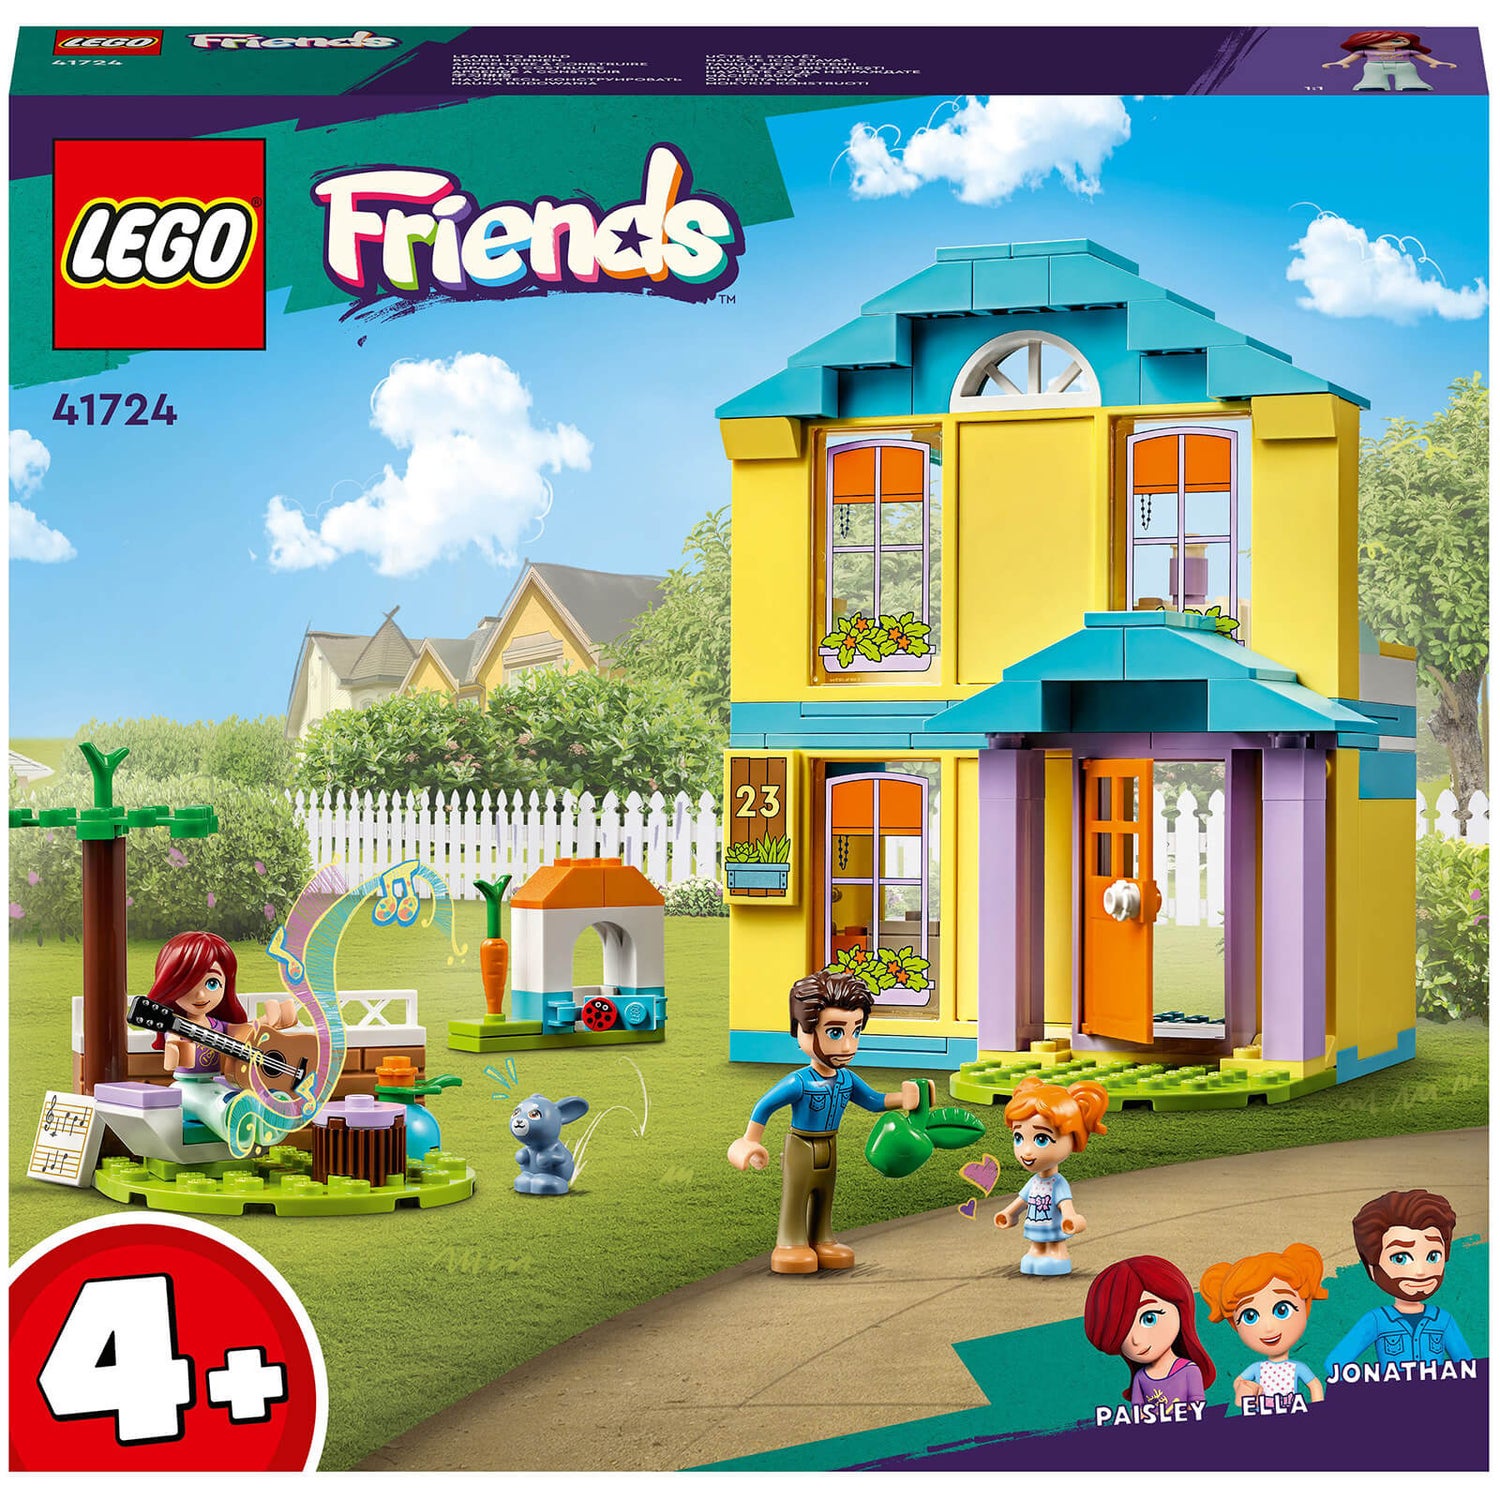 LEGO Friends: 4 Character House Building Set (41724)